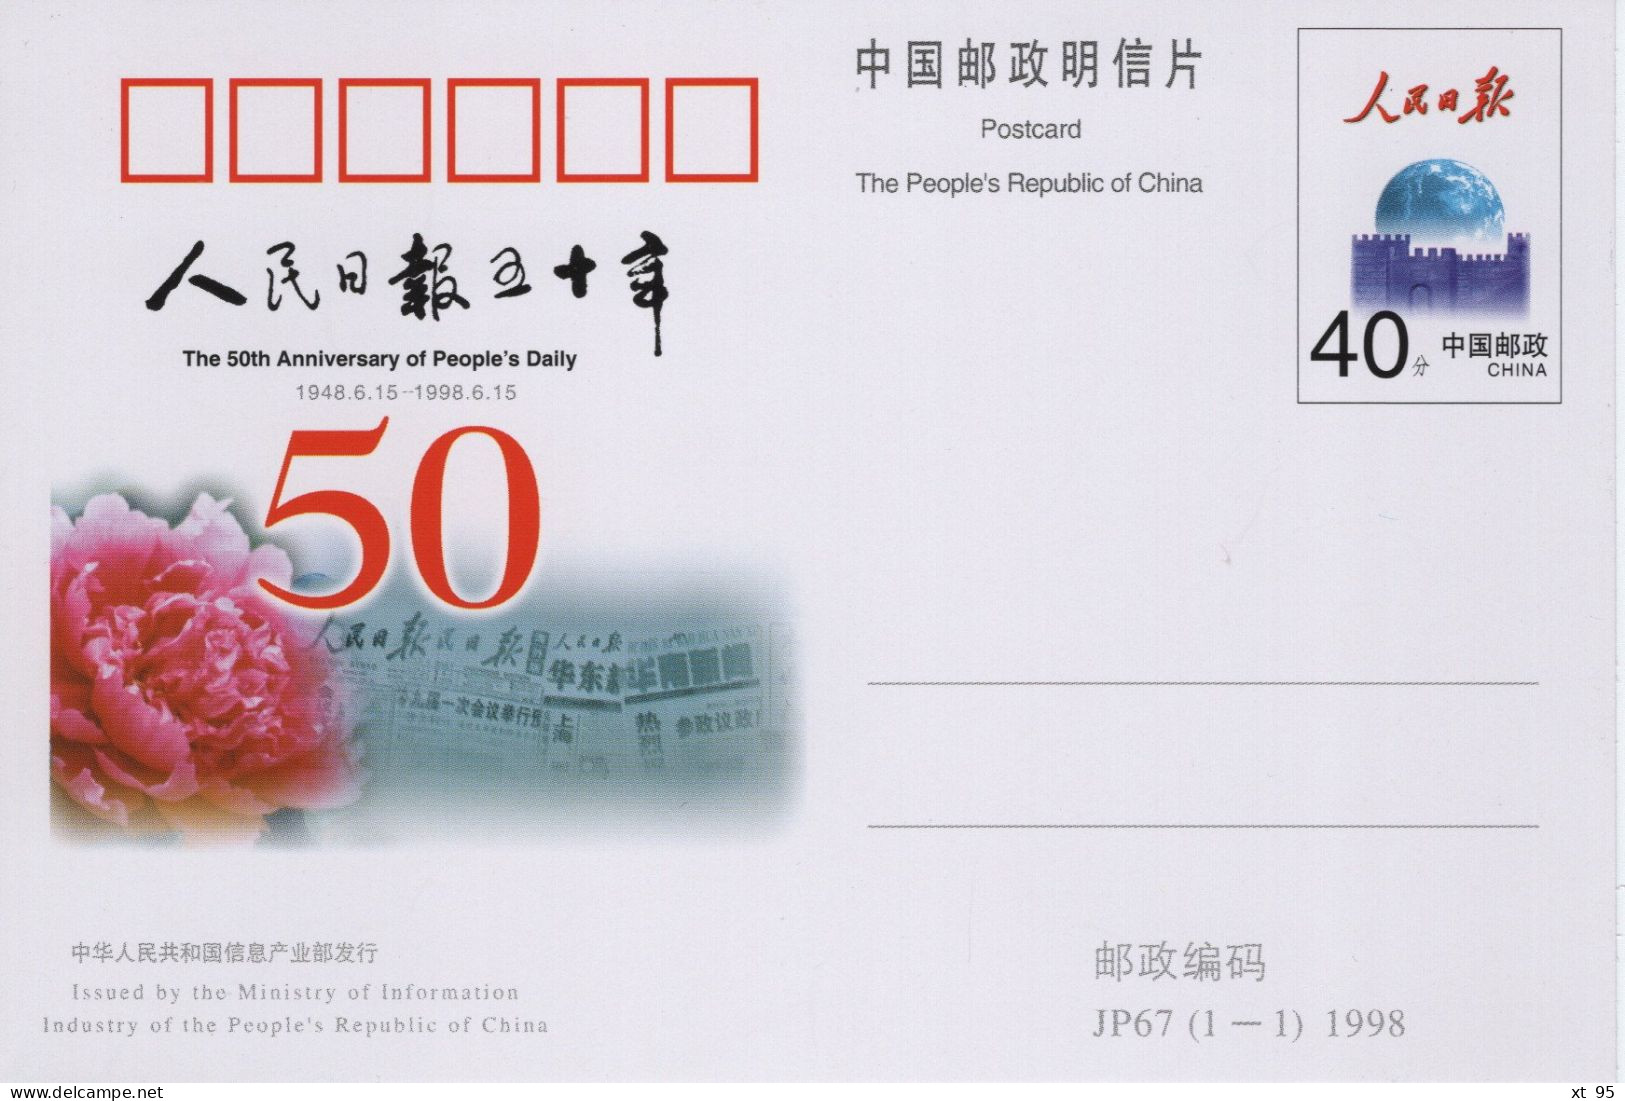 Chine - 1997 - Entier Postal JP67 - People Daily - Cartes Postales